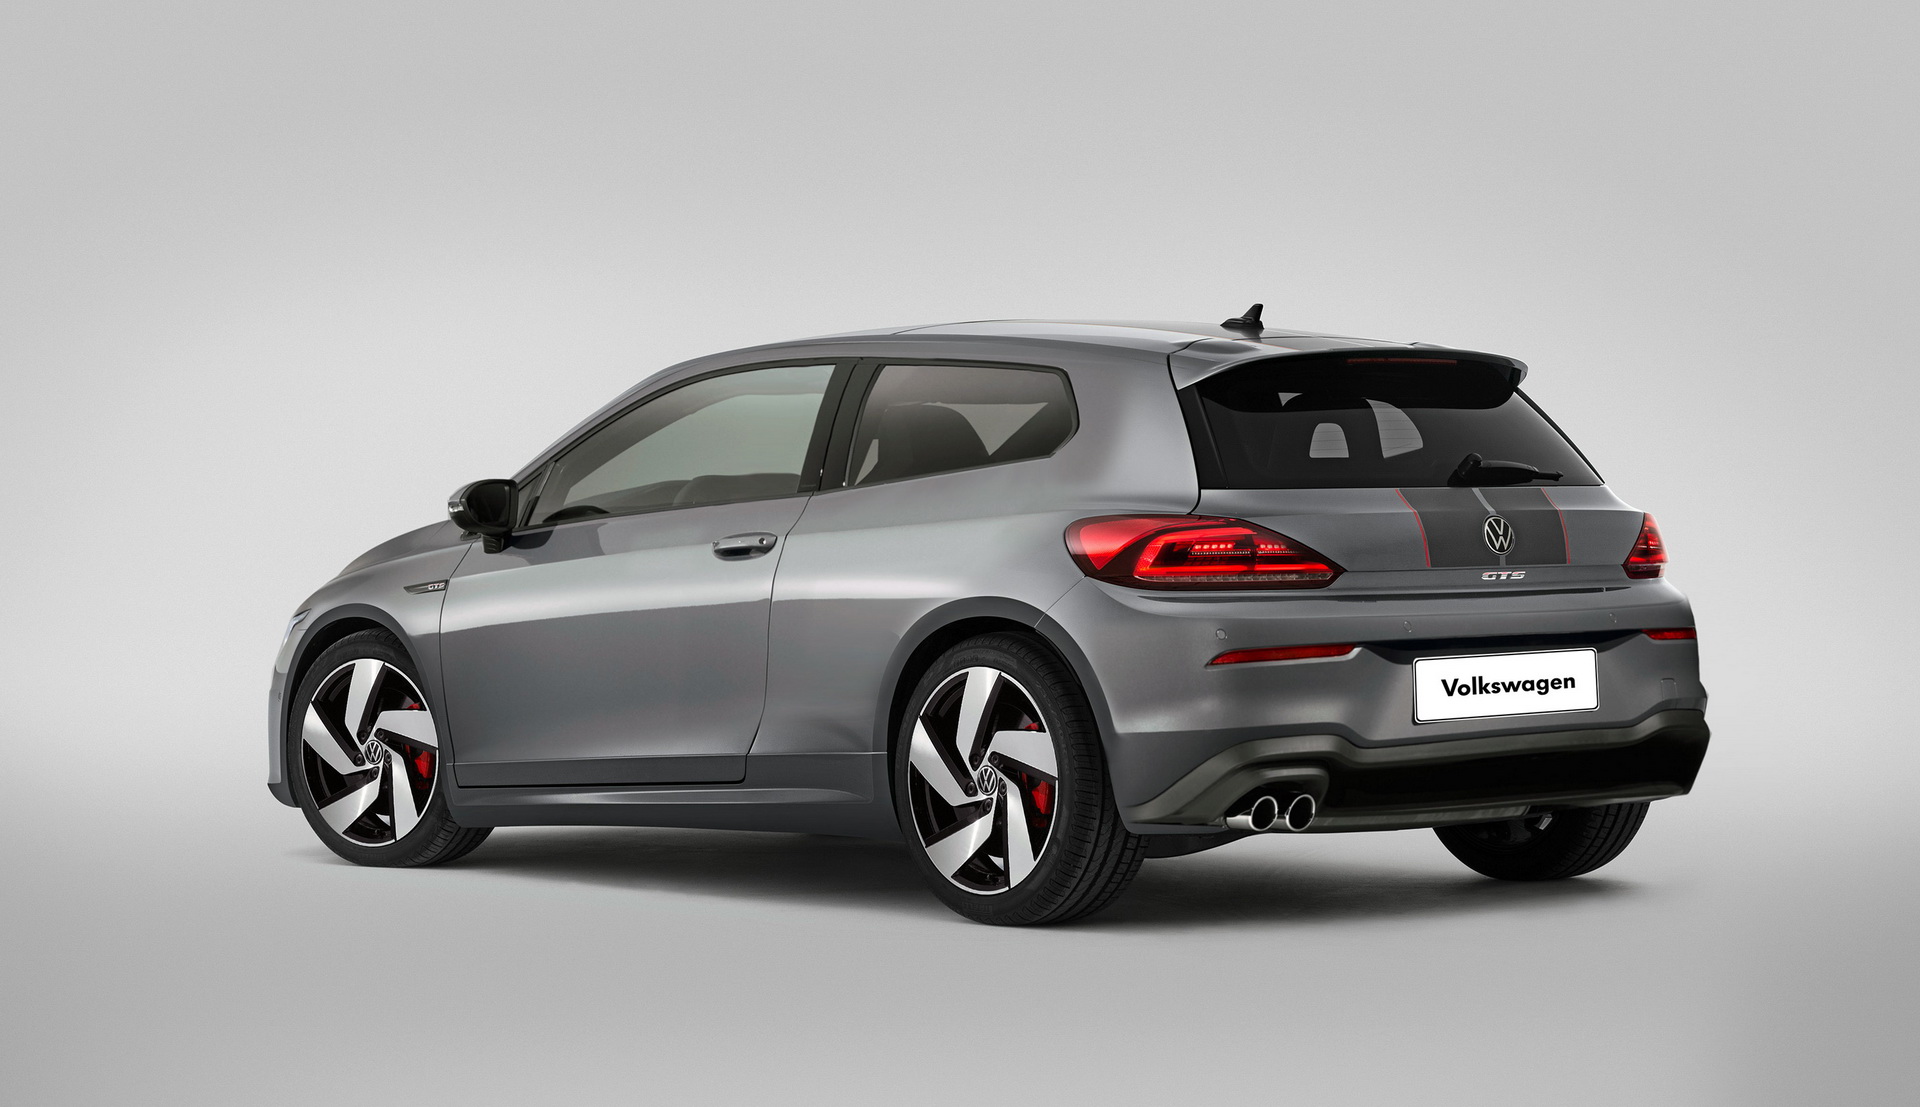 VW Scirocco facelift